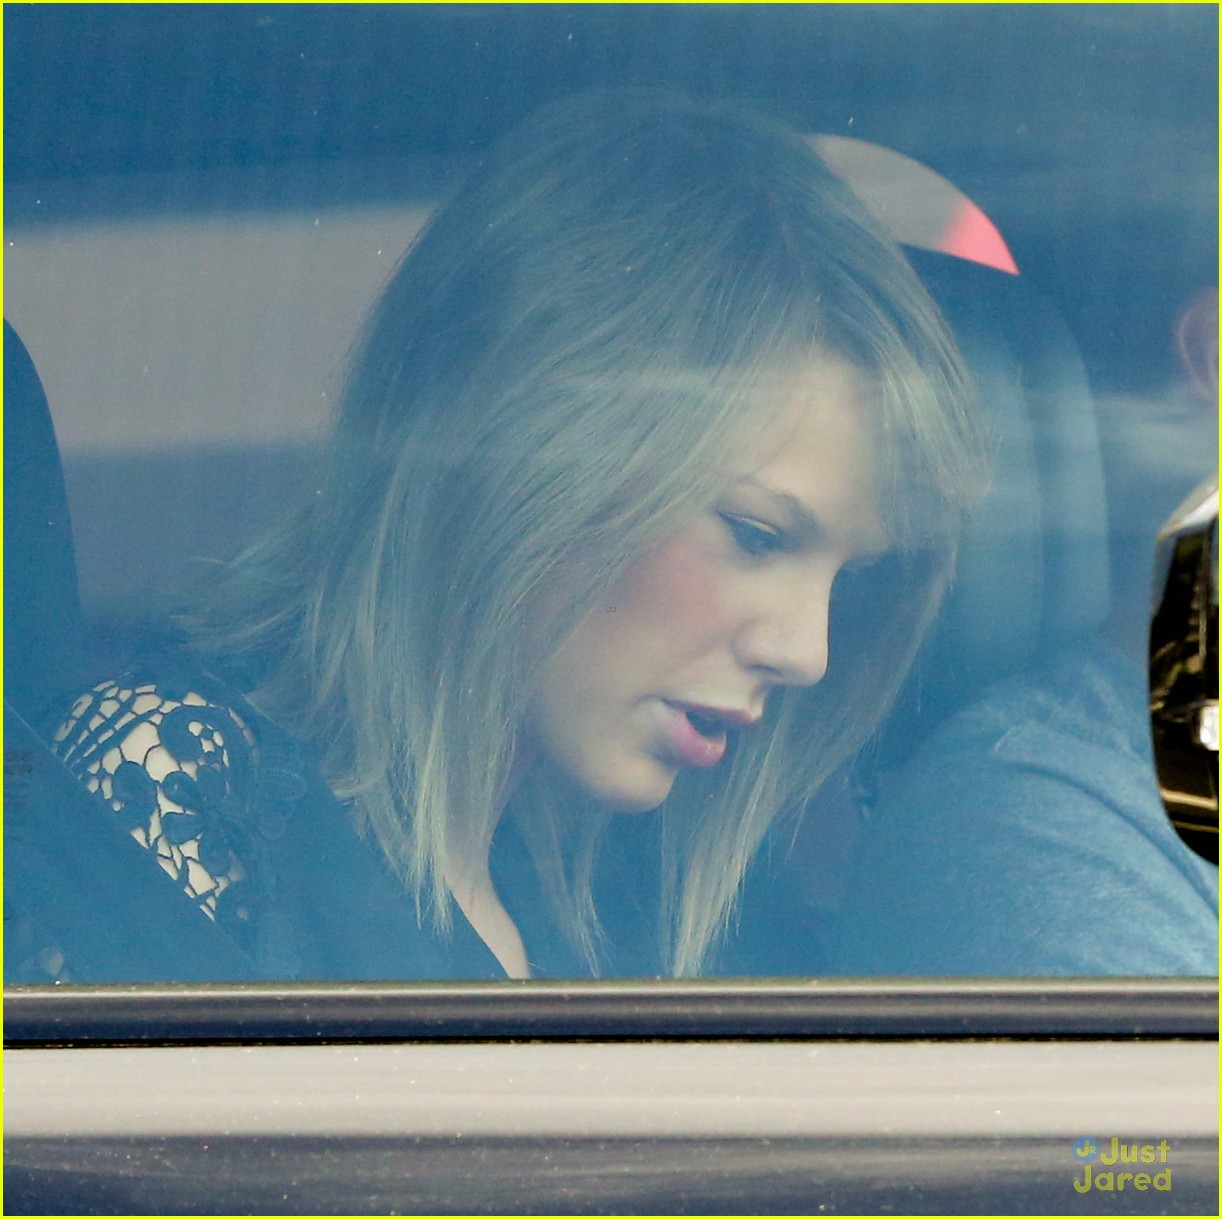 taylor swift calvin harris pictured leaving her house 31